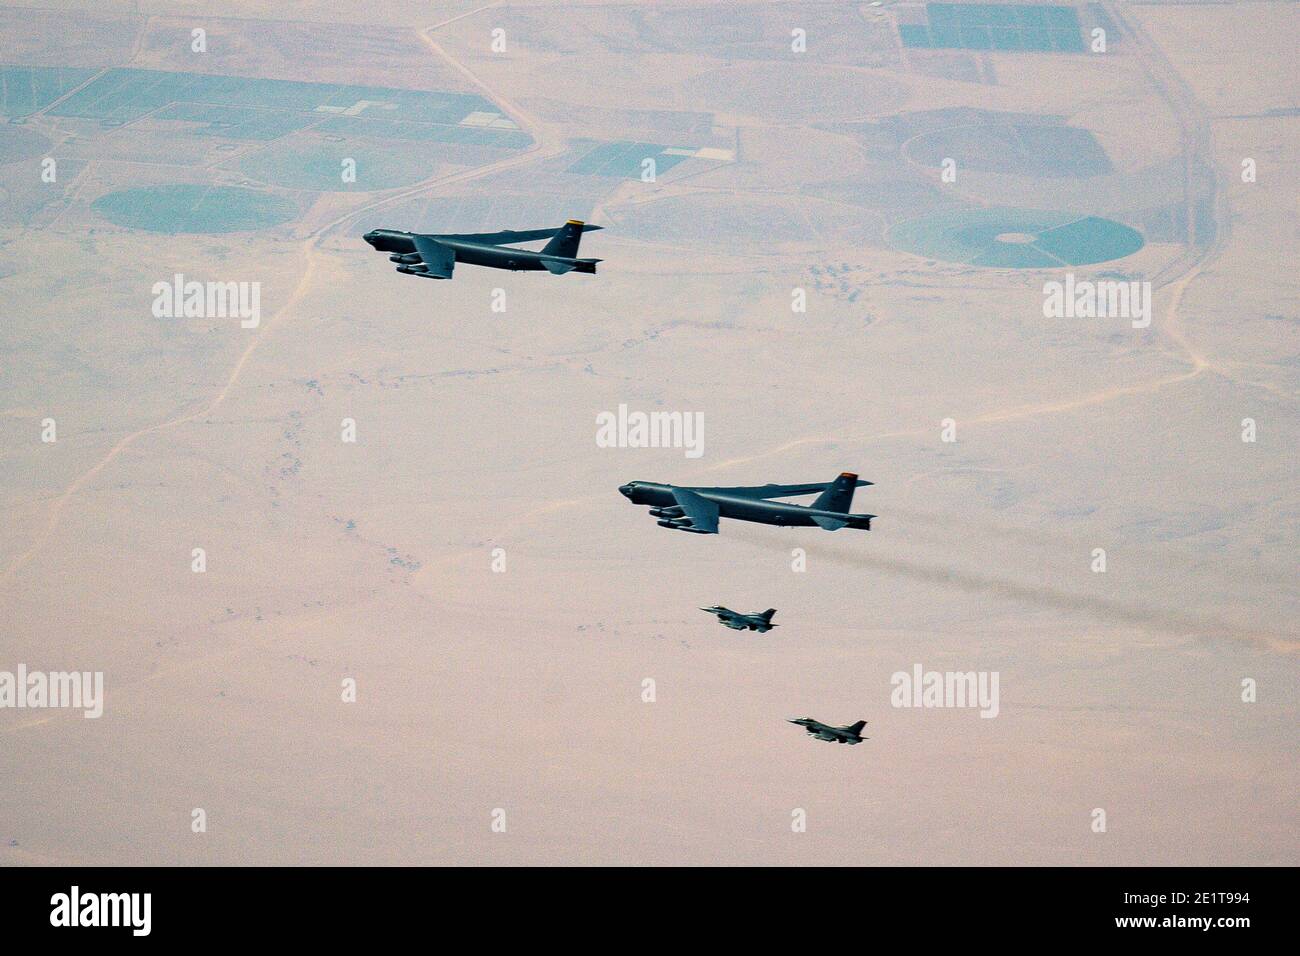 Saudi Arabia, Saudi Arabia. 09th Jan, 2021. U.S. Air Force B-52 Stratofortress strategic bomber aircraft are escorted by U.S. Air Force F-16 Fighting Falcon fighter jets as they fly over Saudi airspace January 7, 2021 in Saudi Arabia. The bomber and escort is a show of force mission as a message to Iran. Credit: Planetpix/Alamy Live News Stock Photo